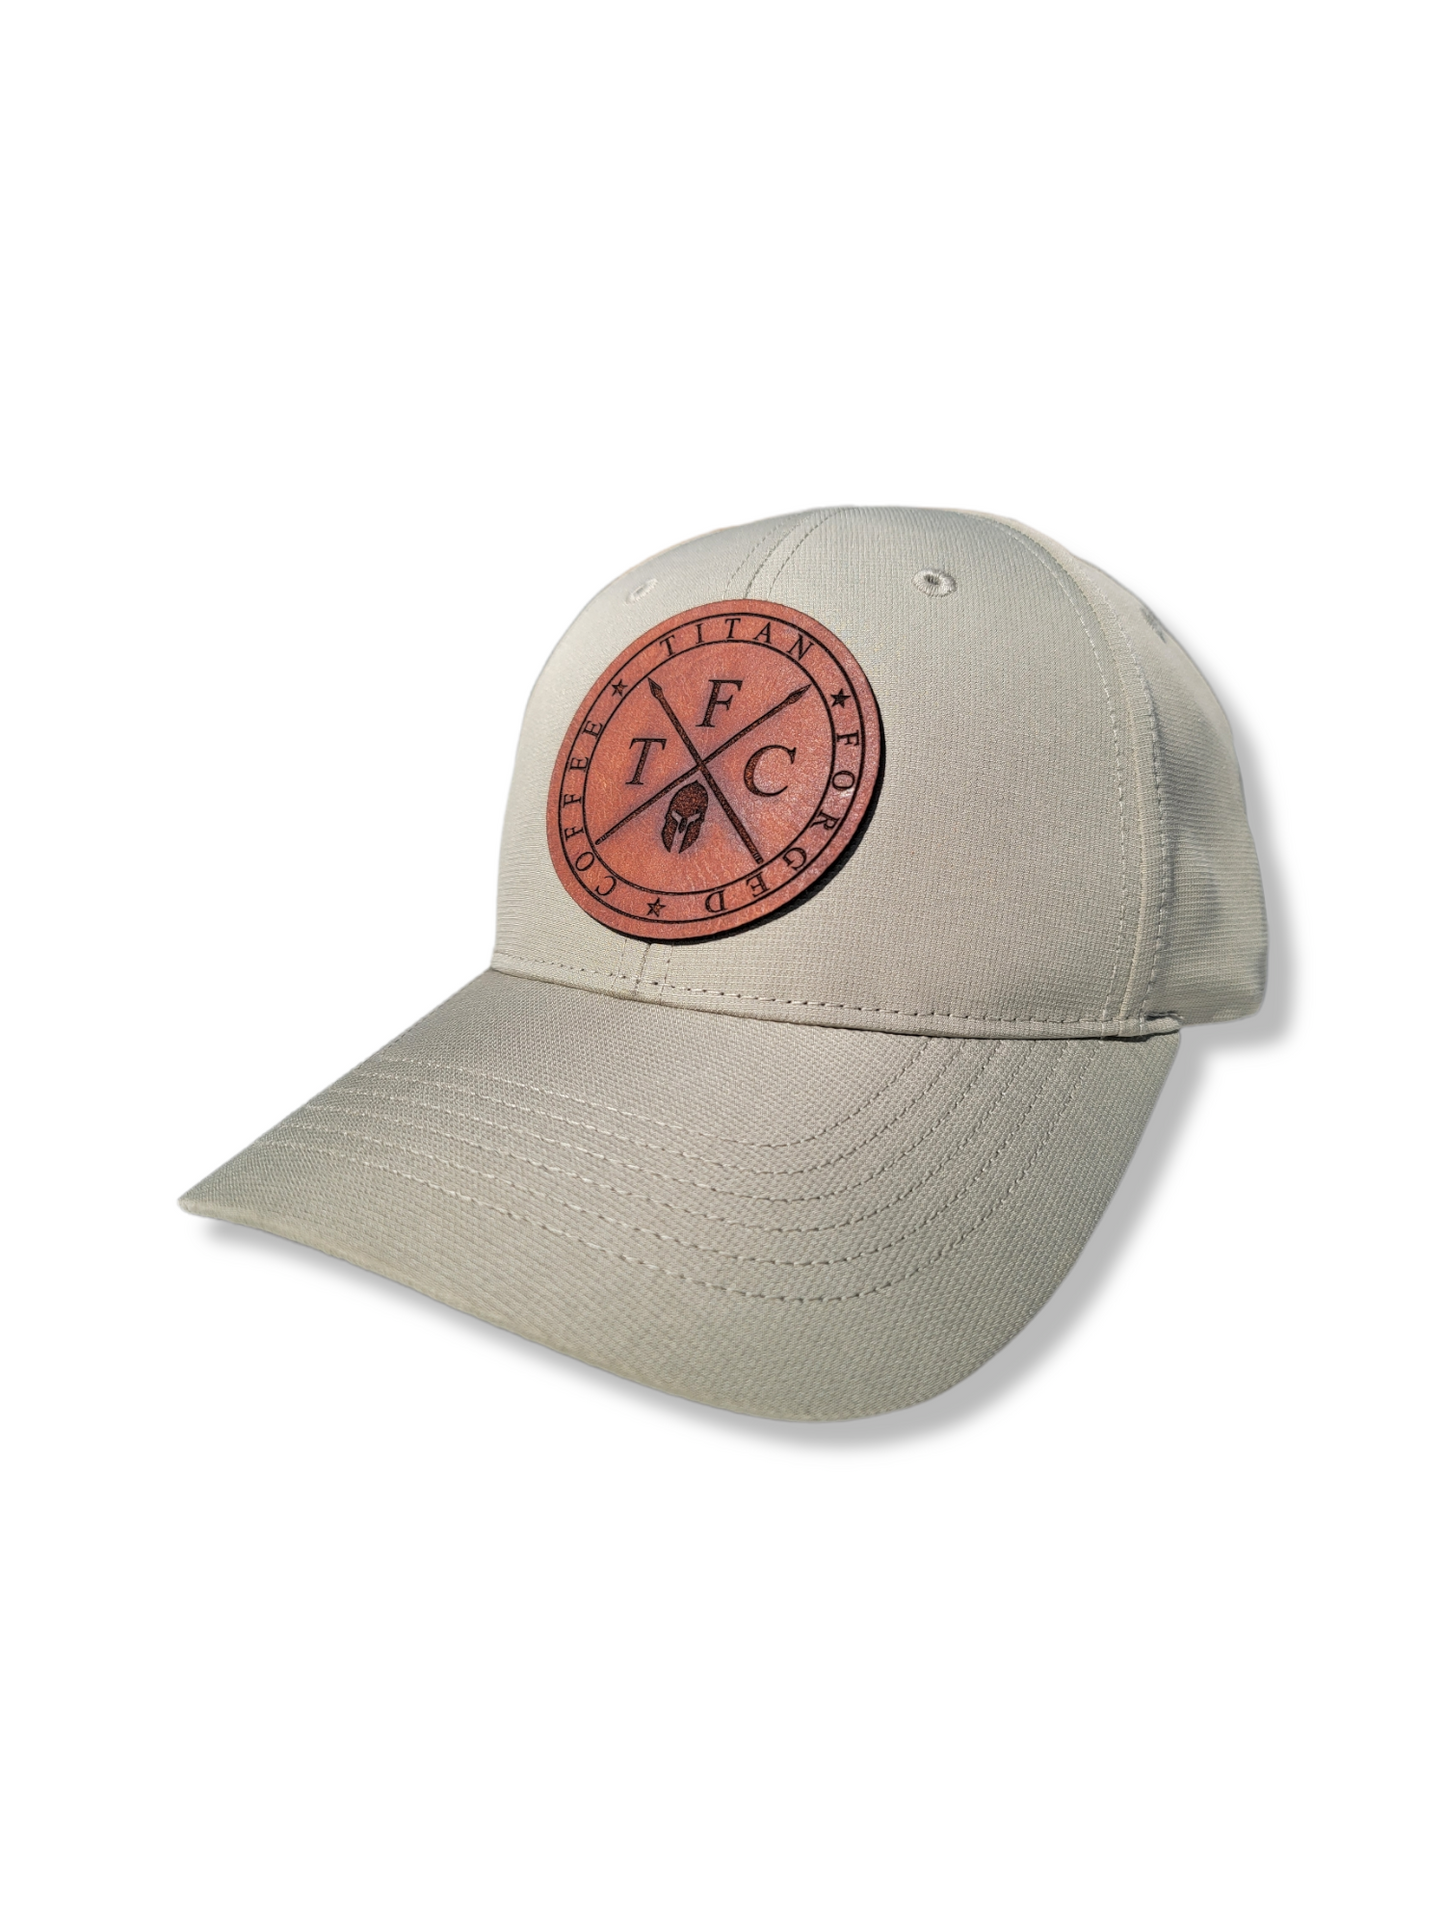 TFC- Leather Patch, Slate Performance Hat